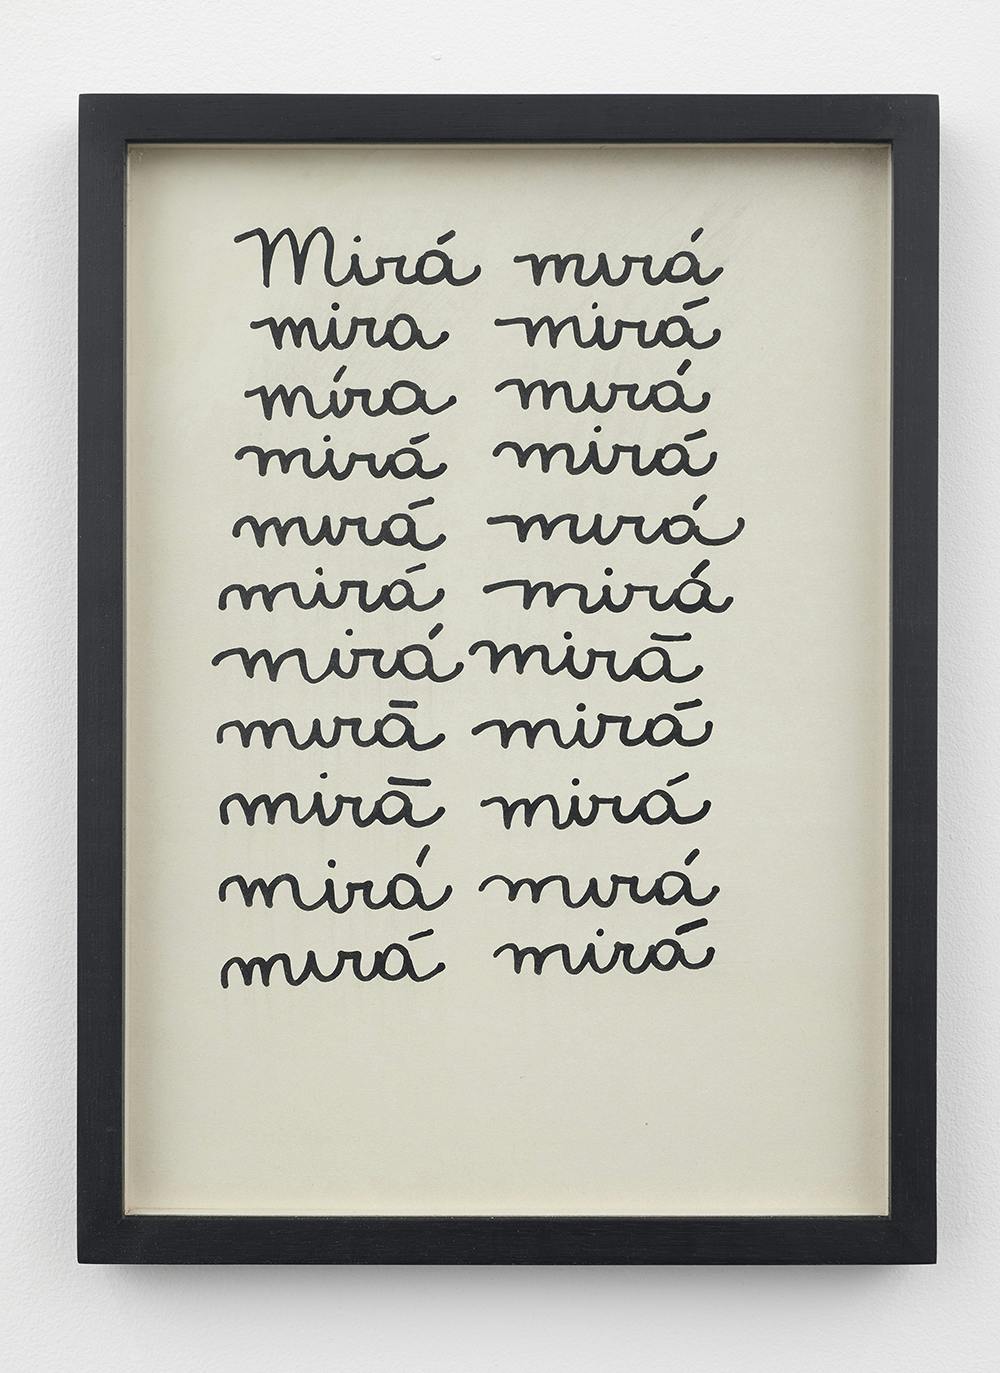 Framed, hand-painted note with the word "mirá" repeated down the page.